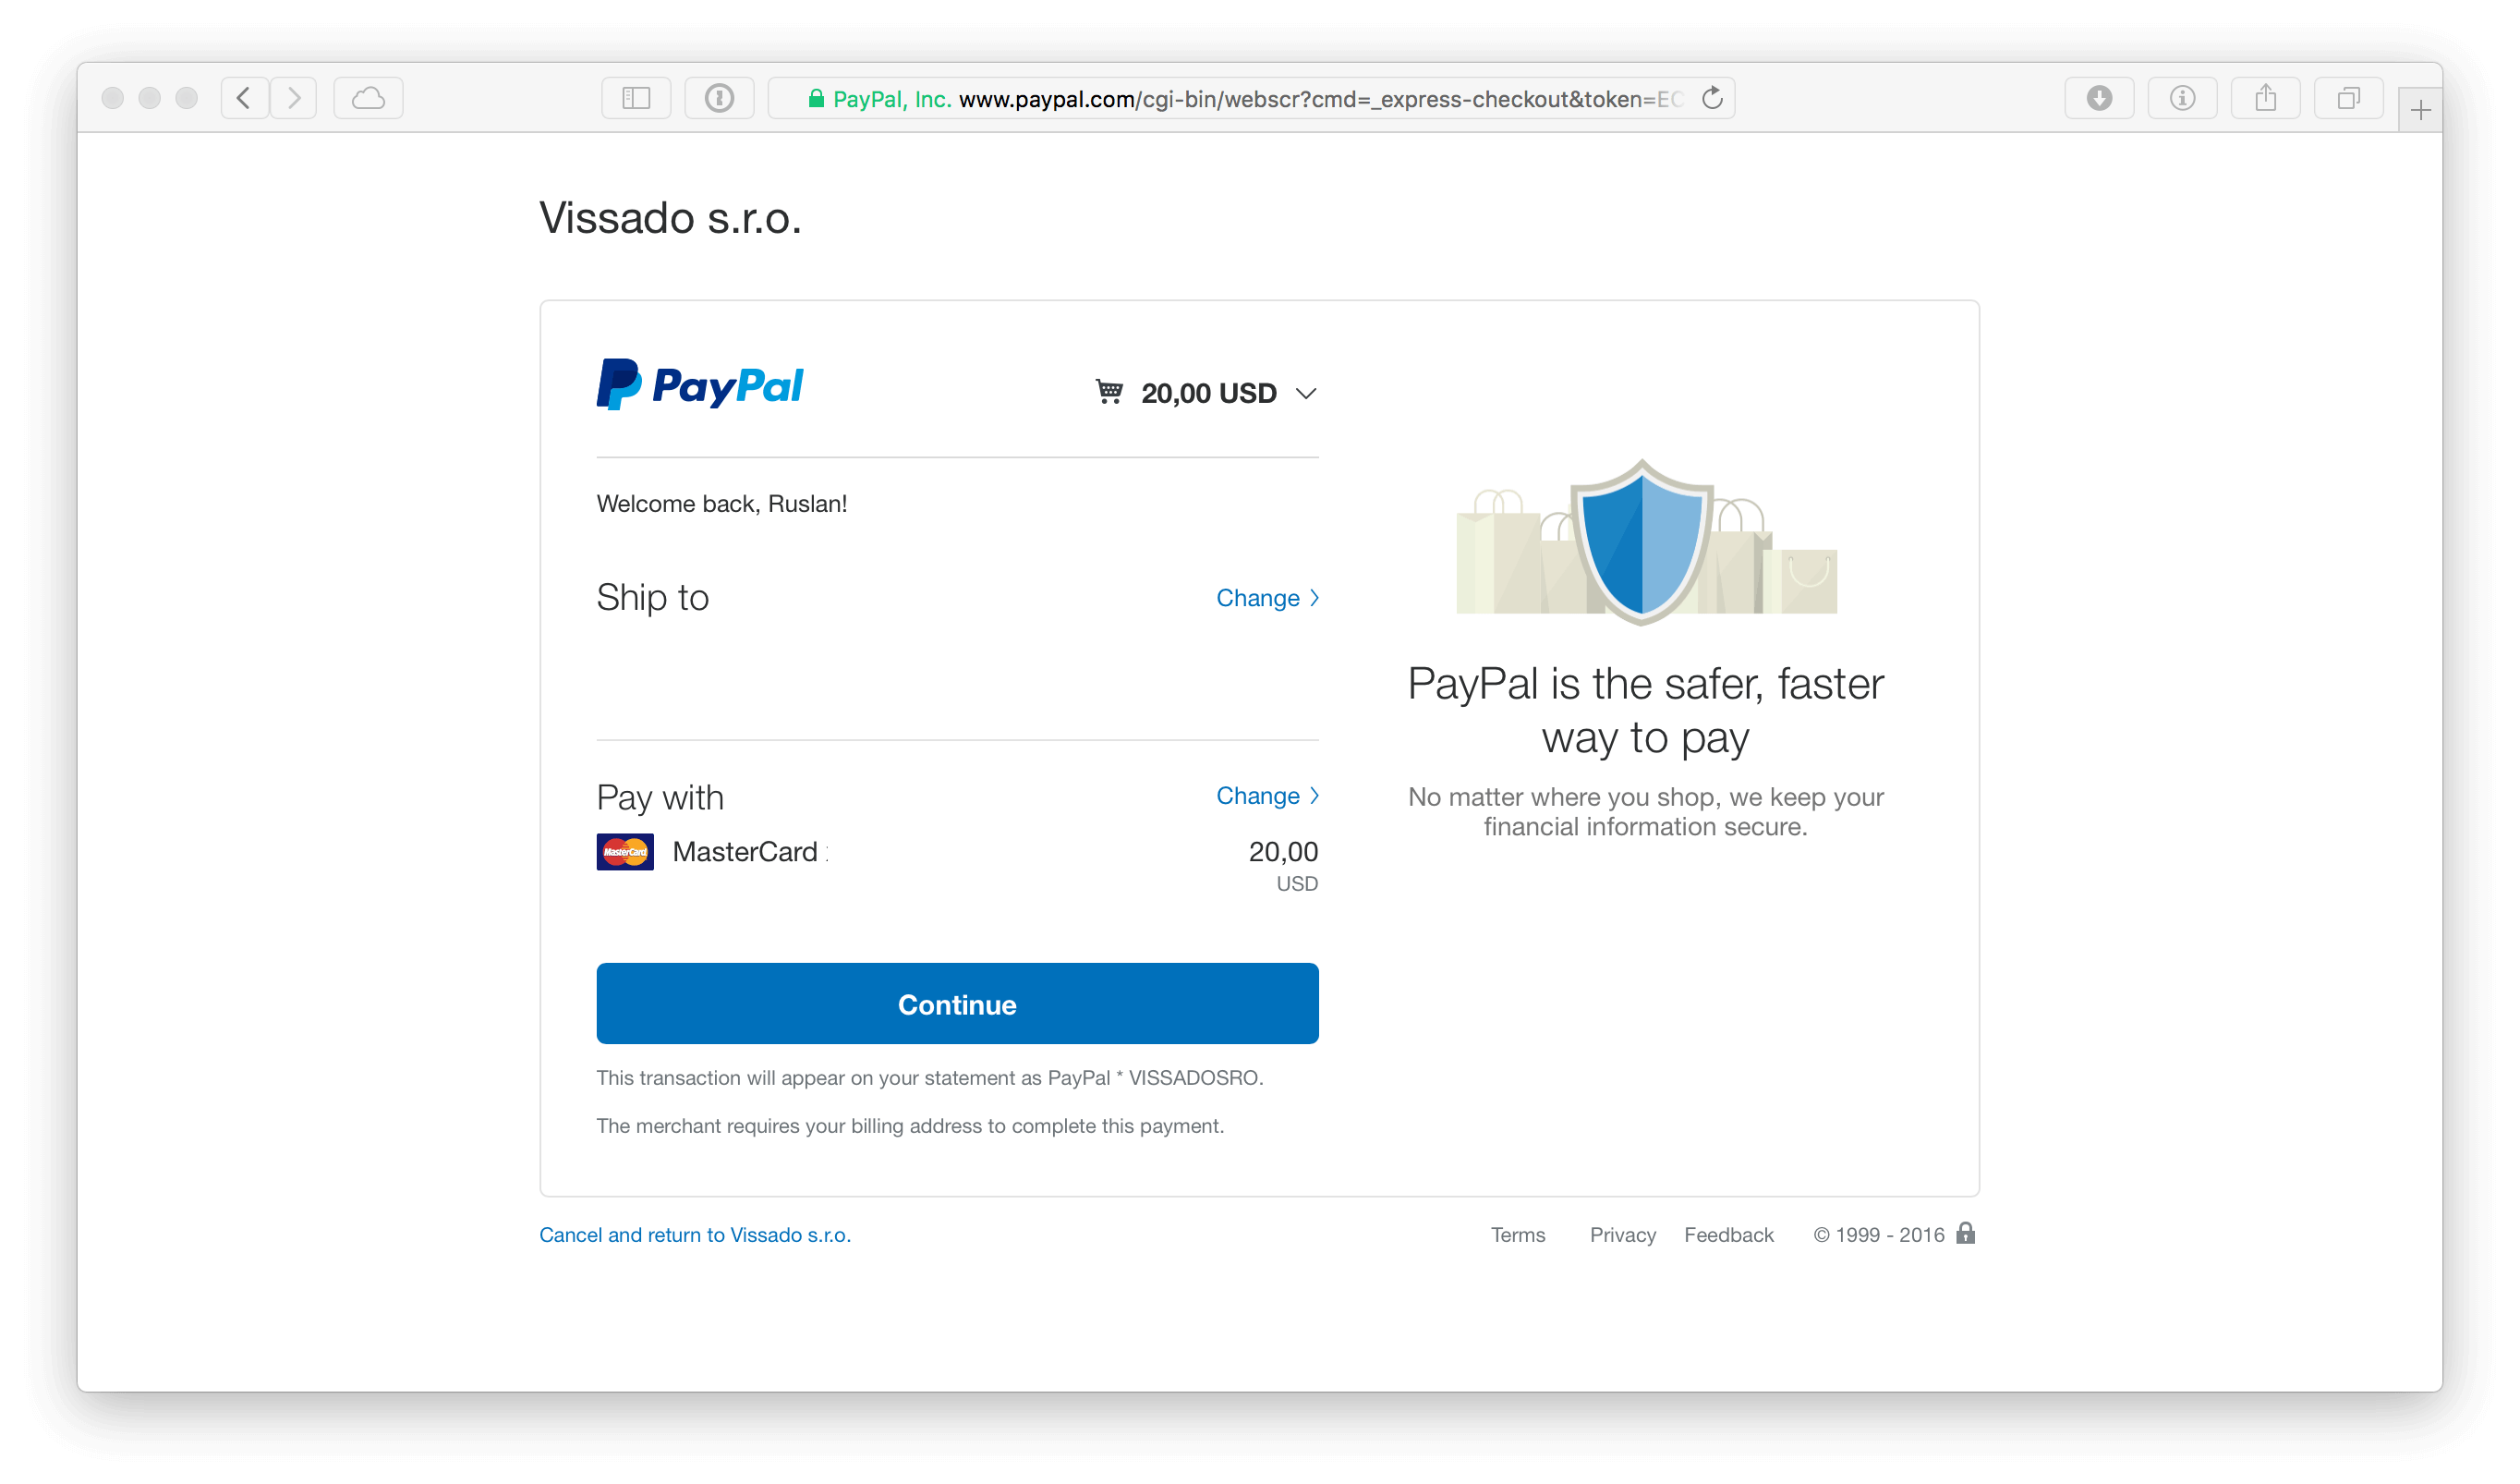 Customers can use PayPal page to make the payment